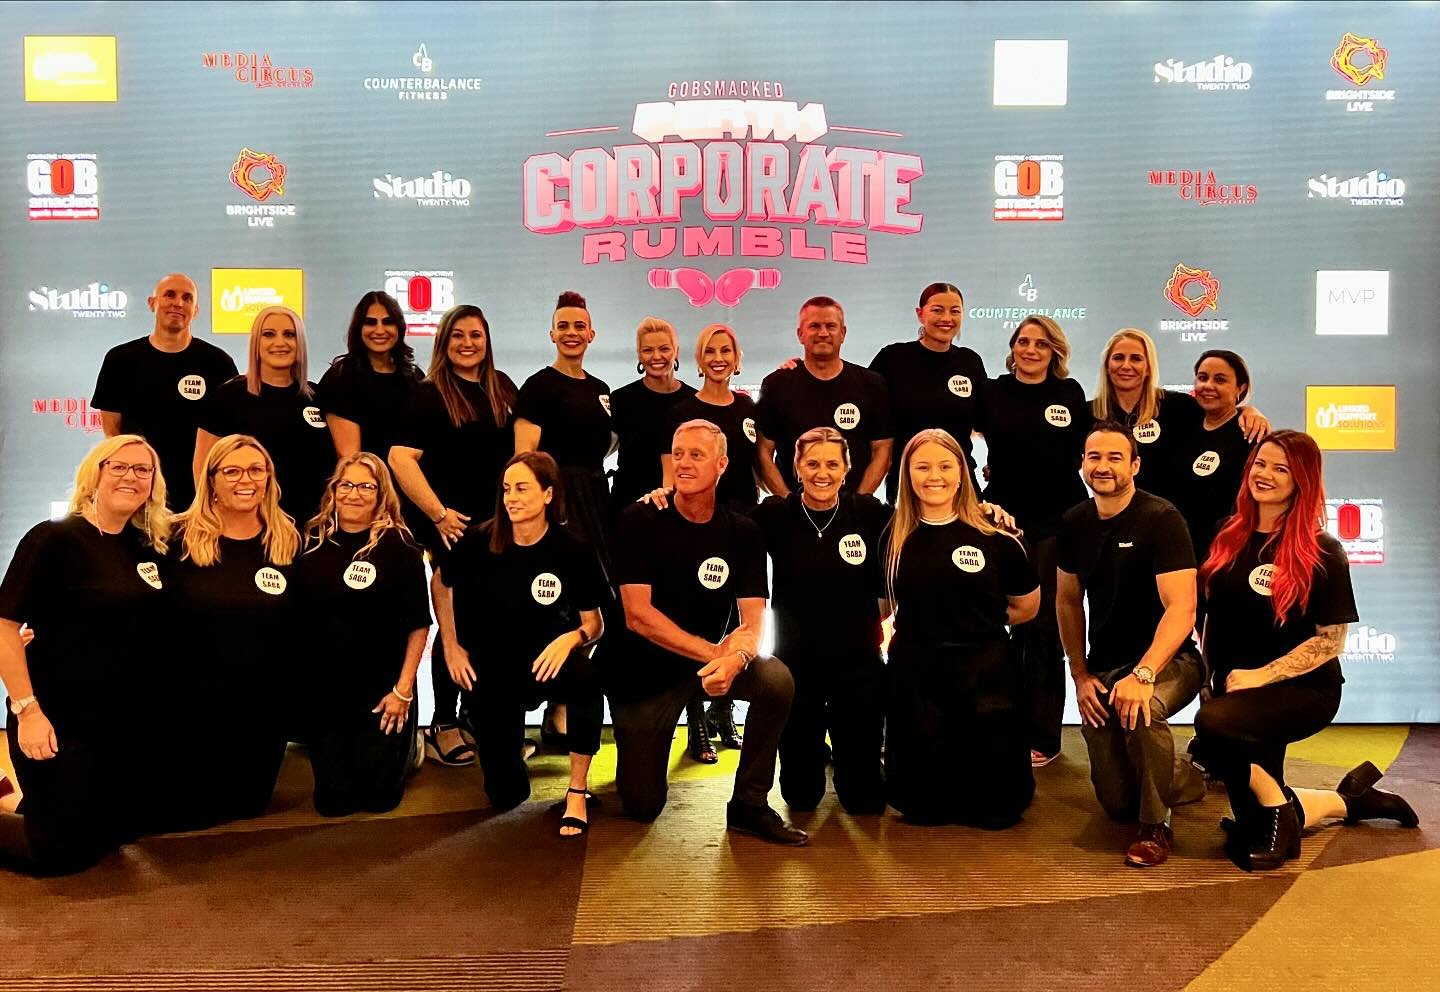 T E A M  S A B A 🤍👏🏻

🤍👏🏻 Thank you to all of these A M A Z I N G volunteers who worked for TEAM SABA at the @perthcorporaterumble last Saturday night! We are so grateful for their time, energy &amp; commitment X X @team_saba @sharbees 

A B S 